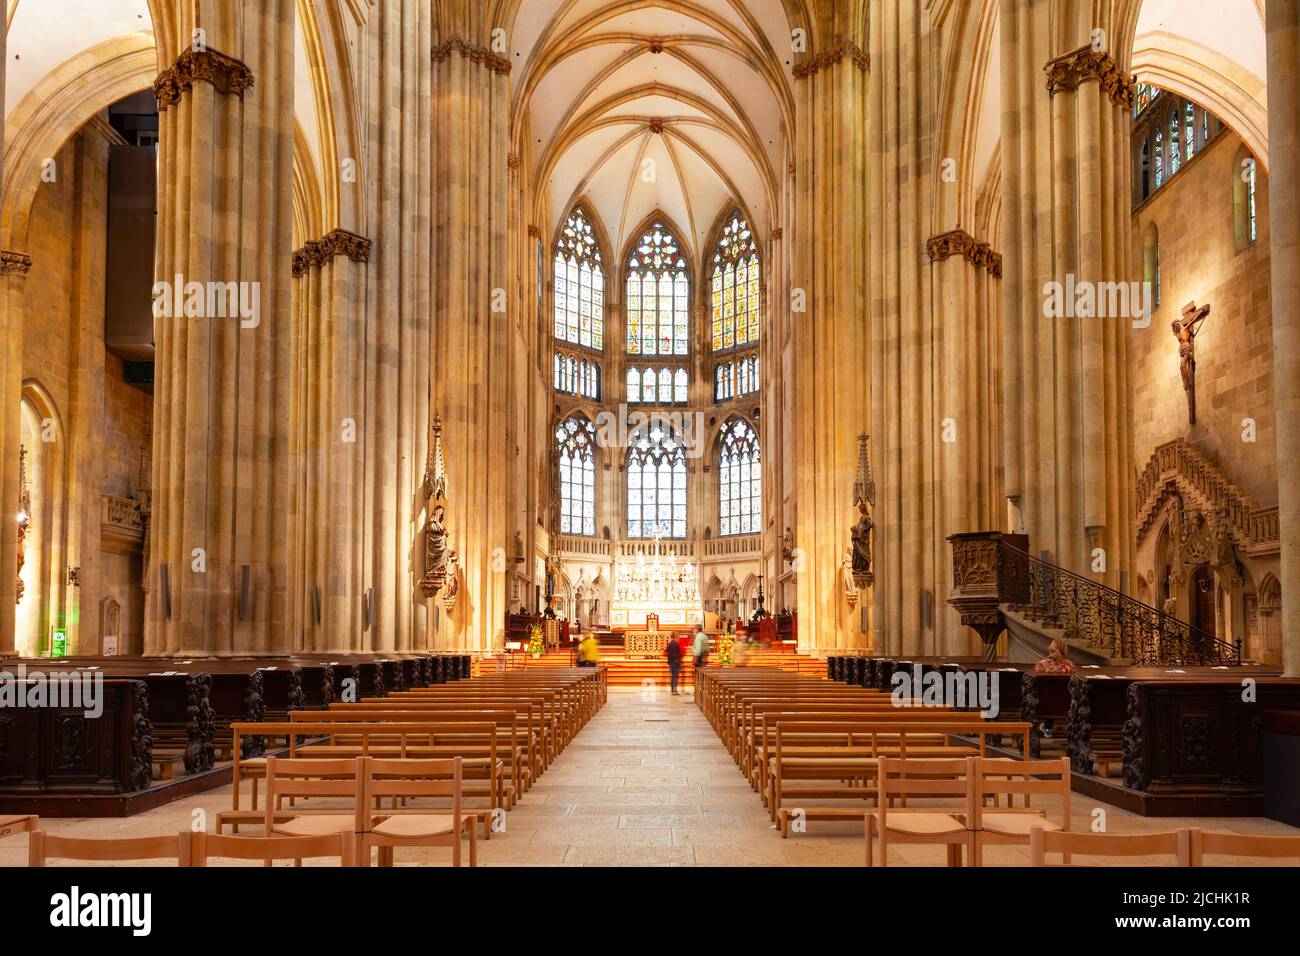 Regensburg, Germany - July 09, 2021: Regensburg Cathedral or Saint Peter Church interior. Regensburg is a city at Danube river in Bavaria, Germany. Stock Photo